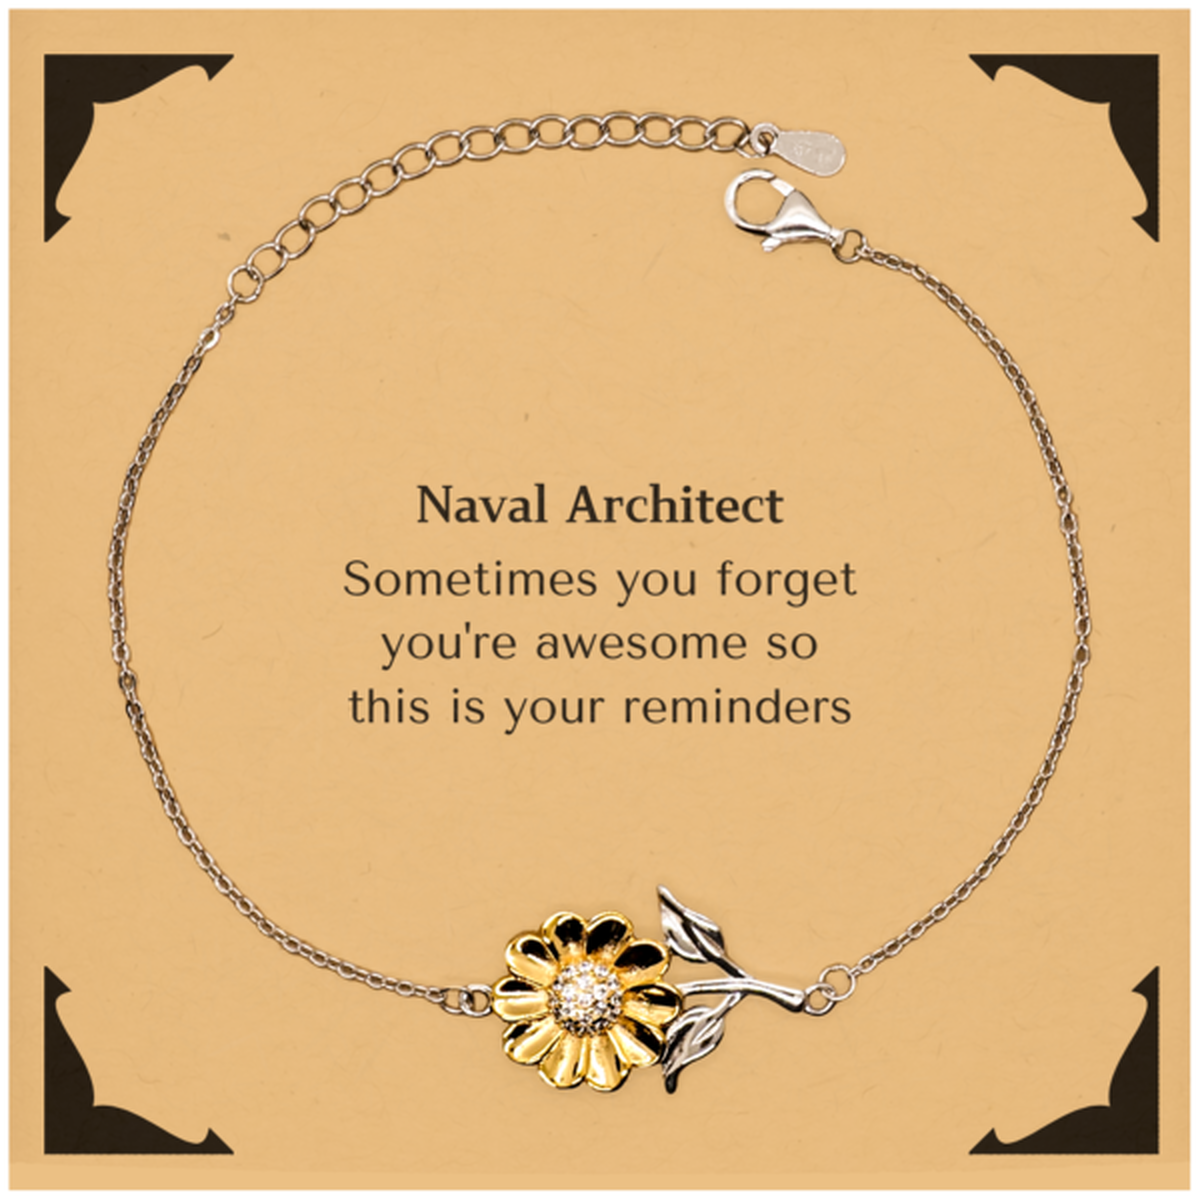 Sentimental Naval Architect Sunflower Bracelet, Naval Architect Sometimes you forget you're awesome so this is your reminders, Graduation Christmas Birthday Gifts for Naval Architect, Men, Women, Coworkers